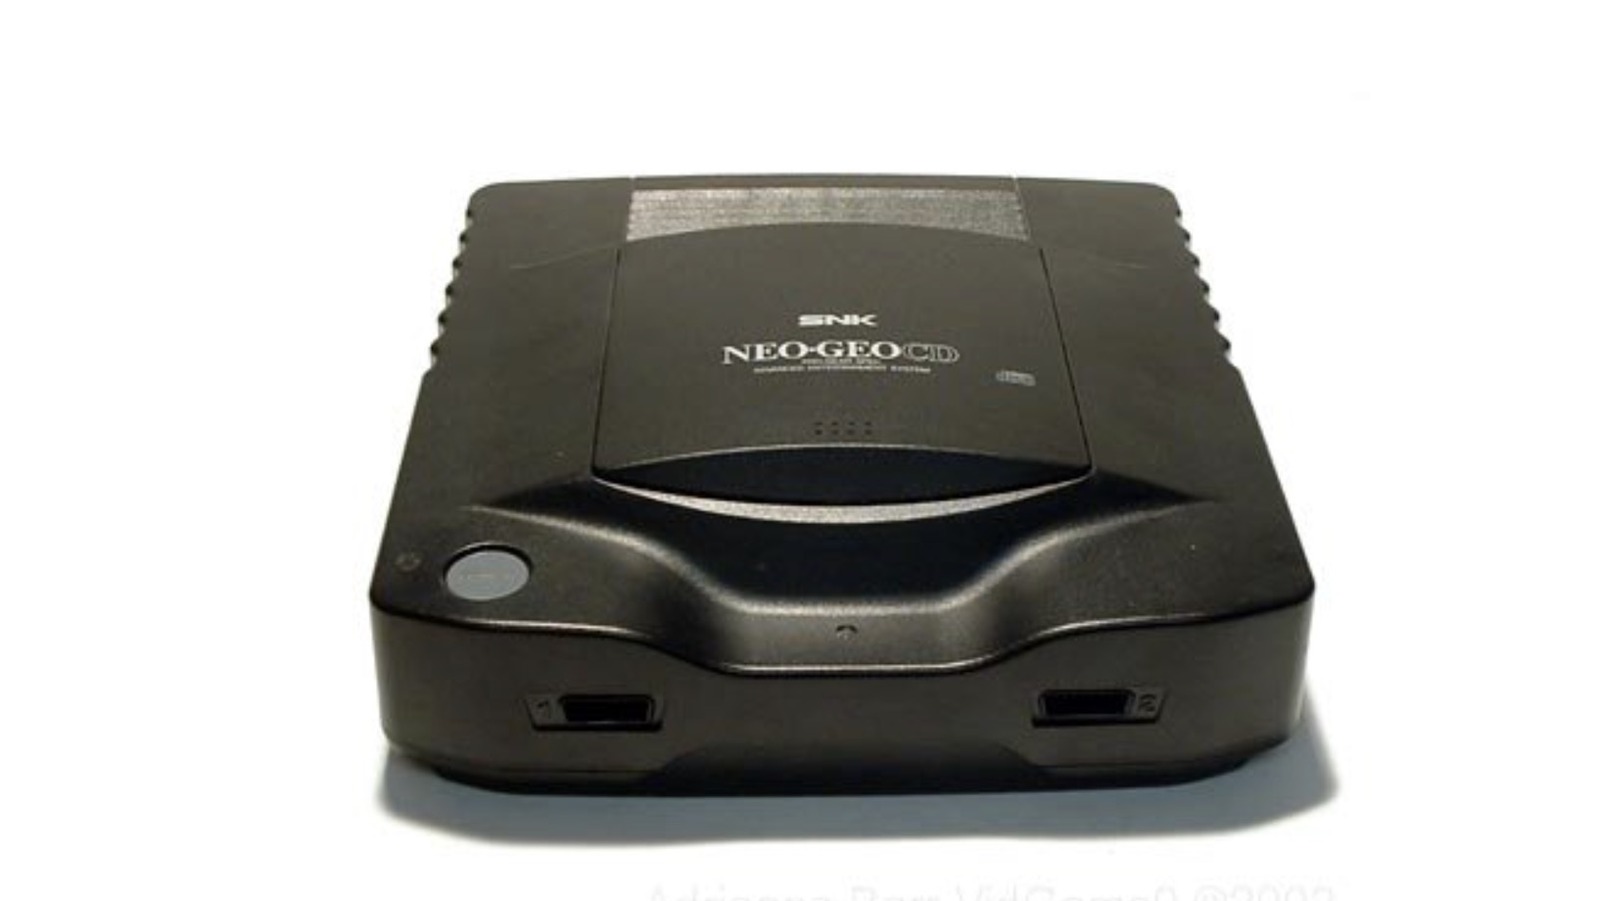 failed gaming consoles  - The Neo Geo CD